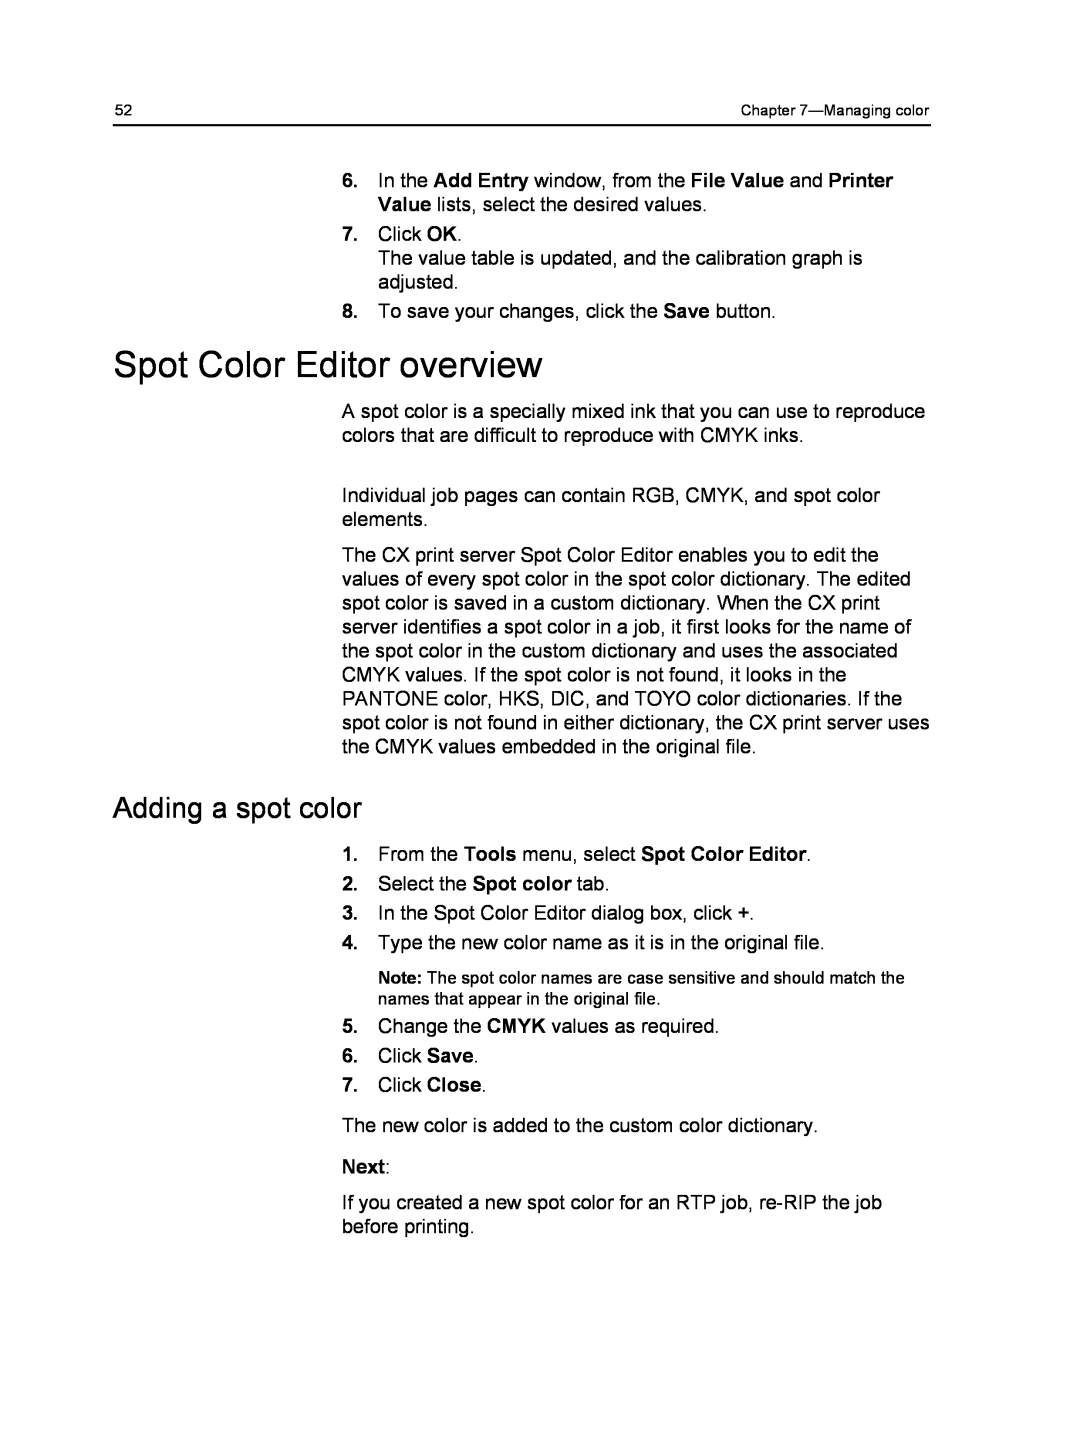 Xerox 560, 550 manual Spot Color Editor overview, Adding a spot color, Next 